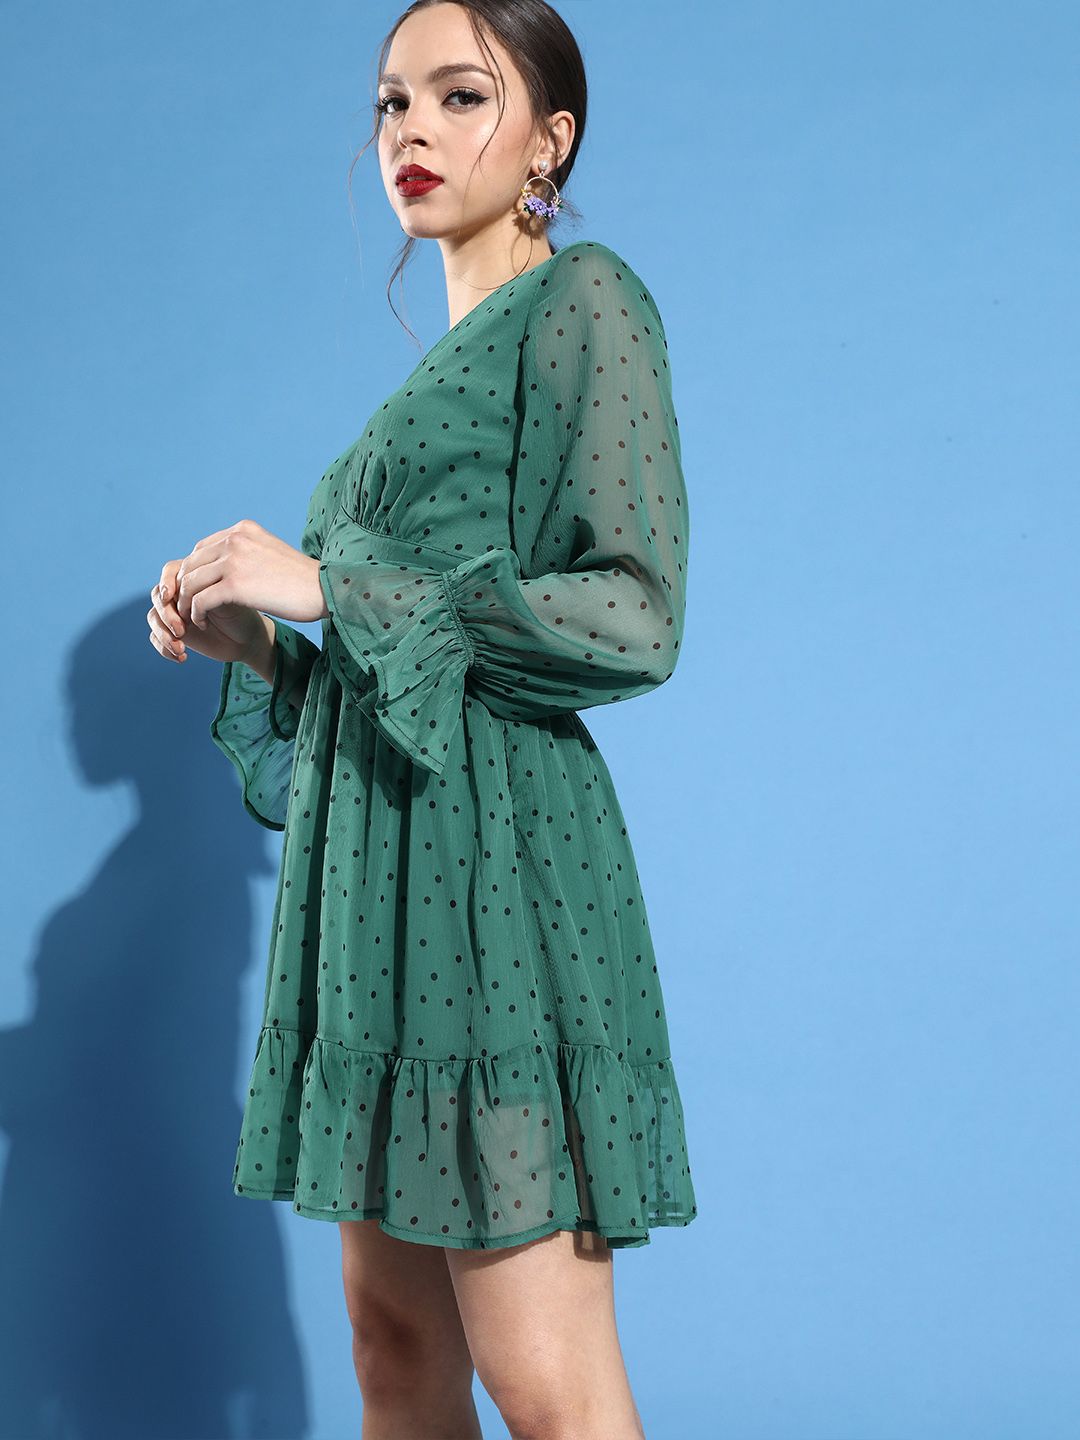 STREET 9 Women Gorgeous Green Polka-Dotted Dress Price in India